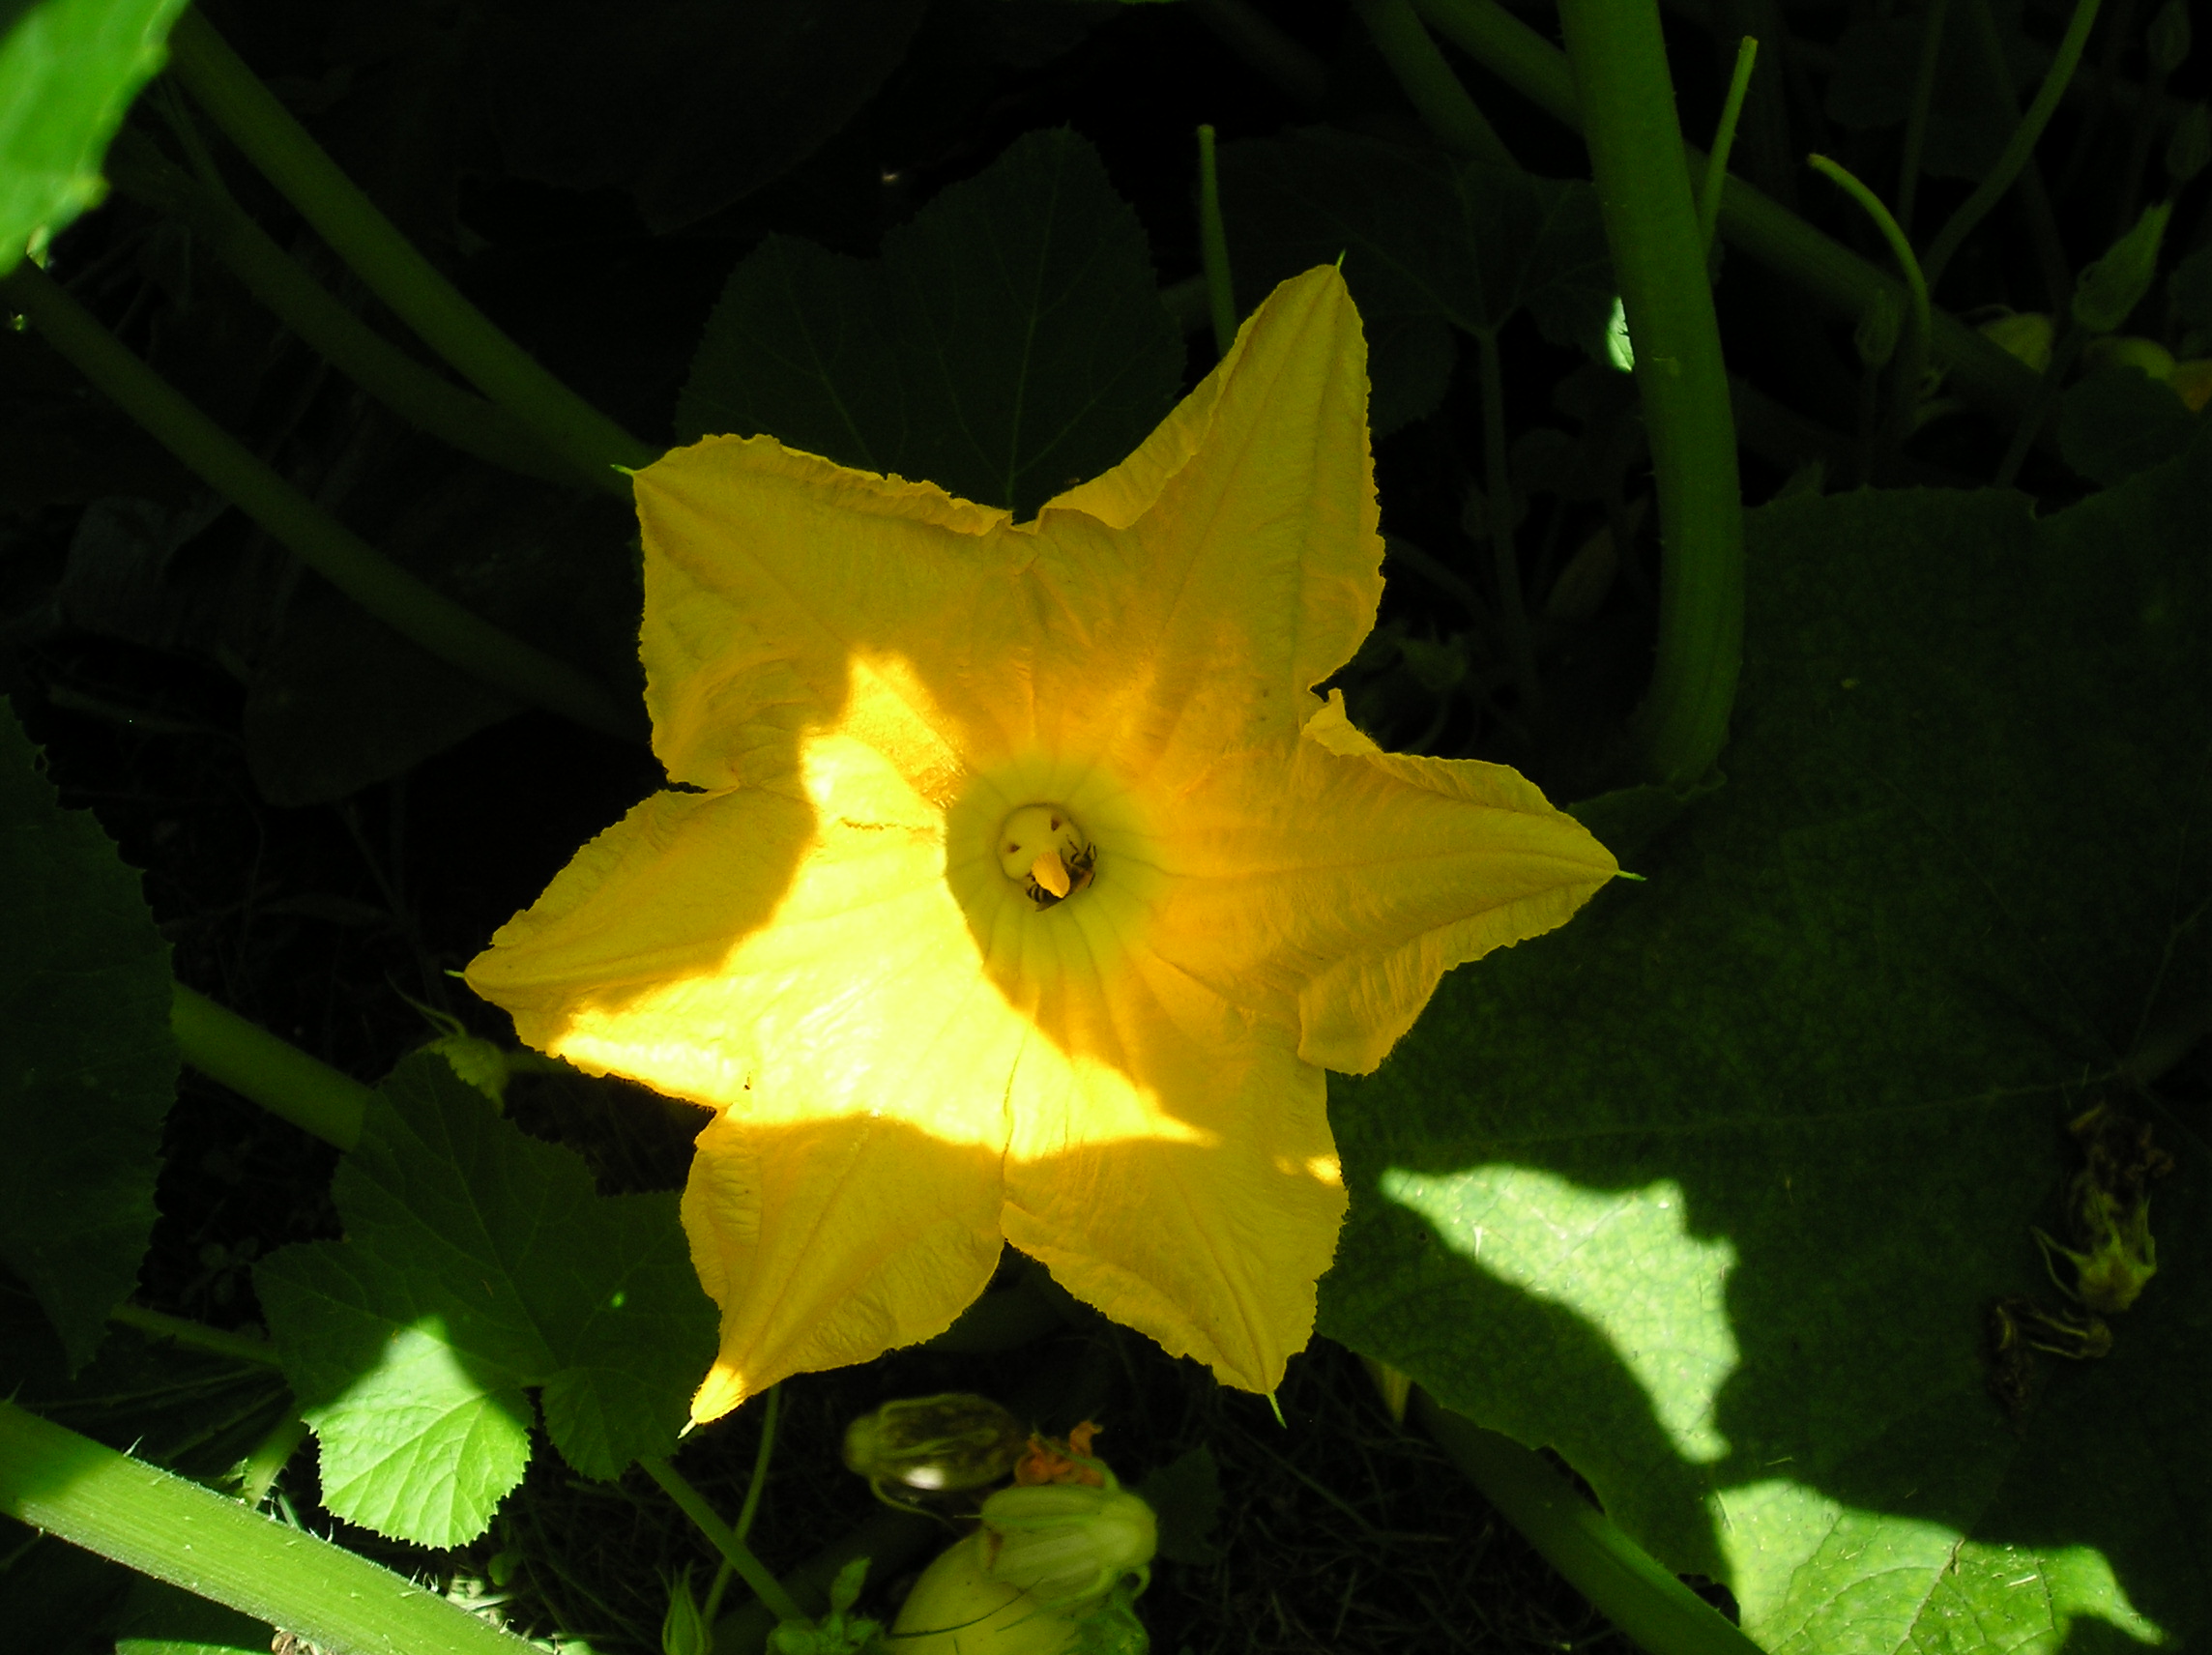 Summer Squash Blossom (user submitted)